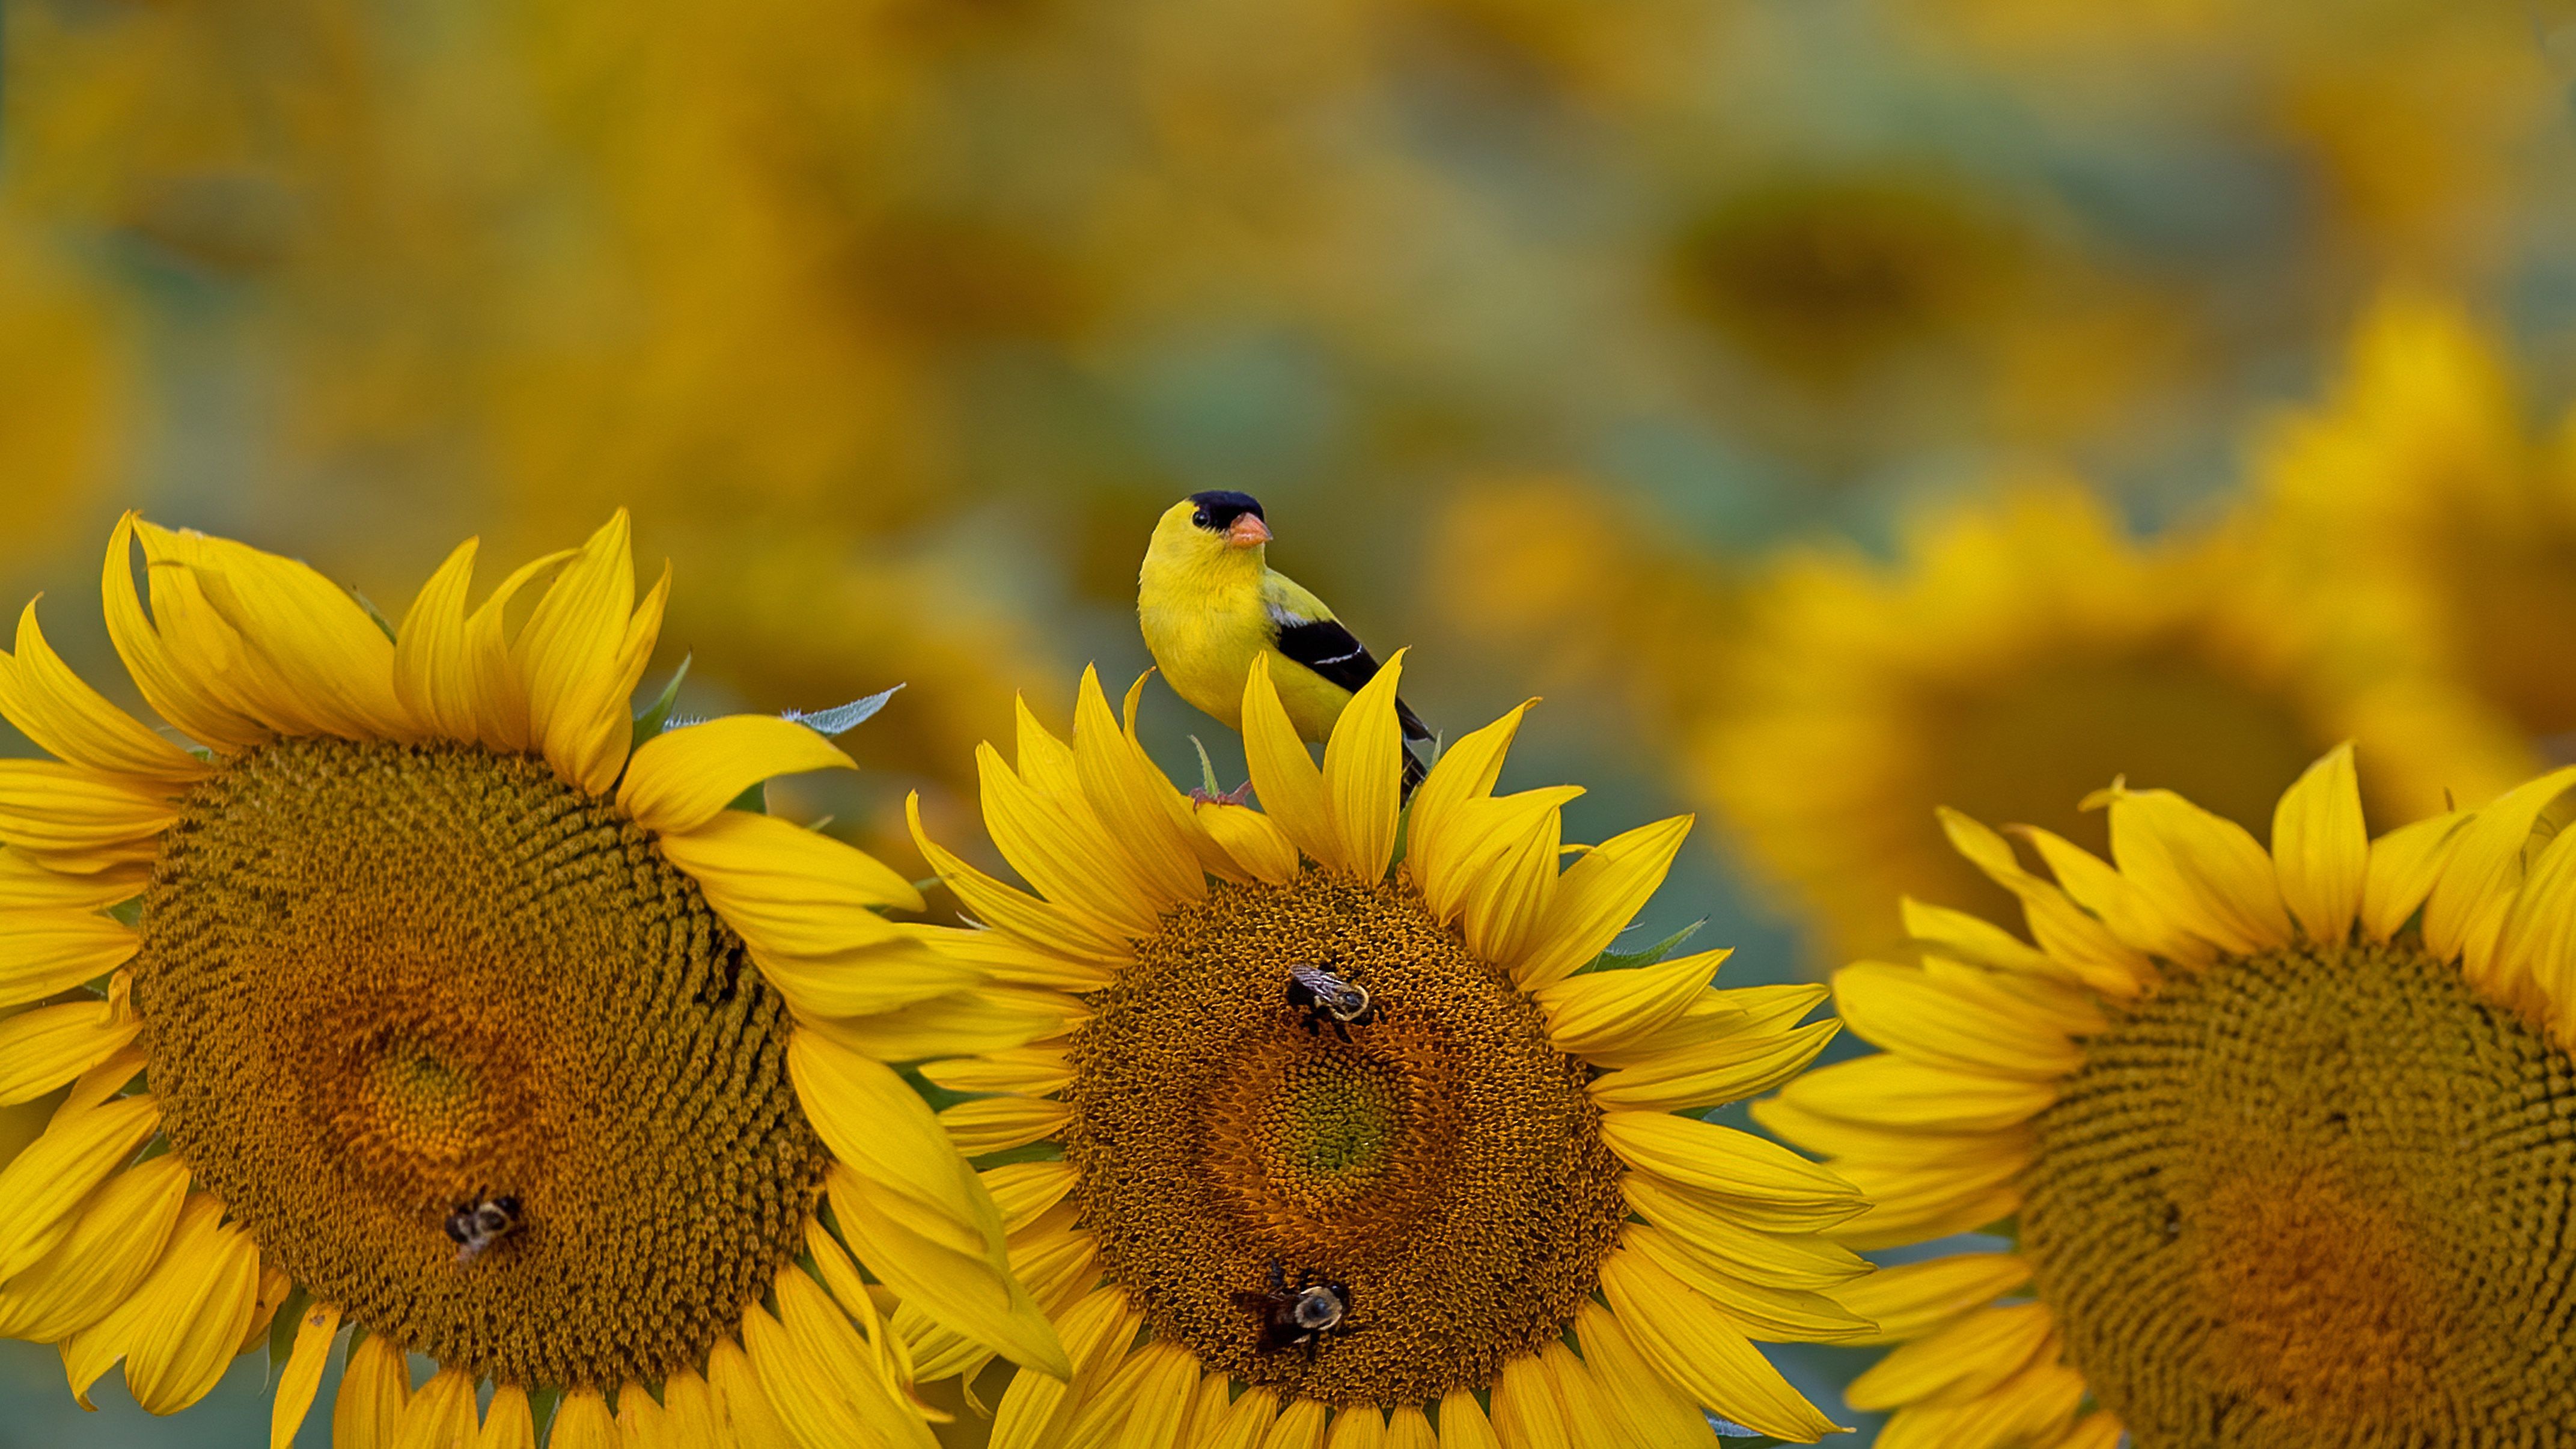 A yellow bird with a red head and black wings sits on a sunflower. - Sunflower